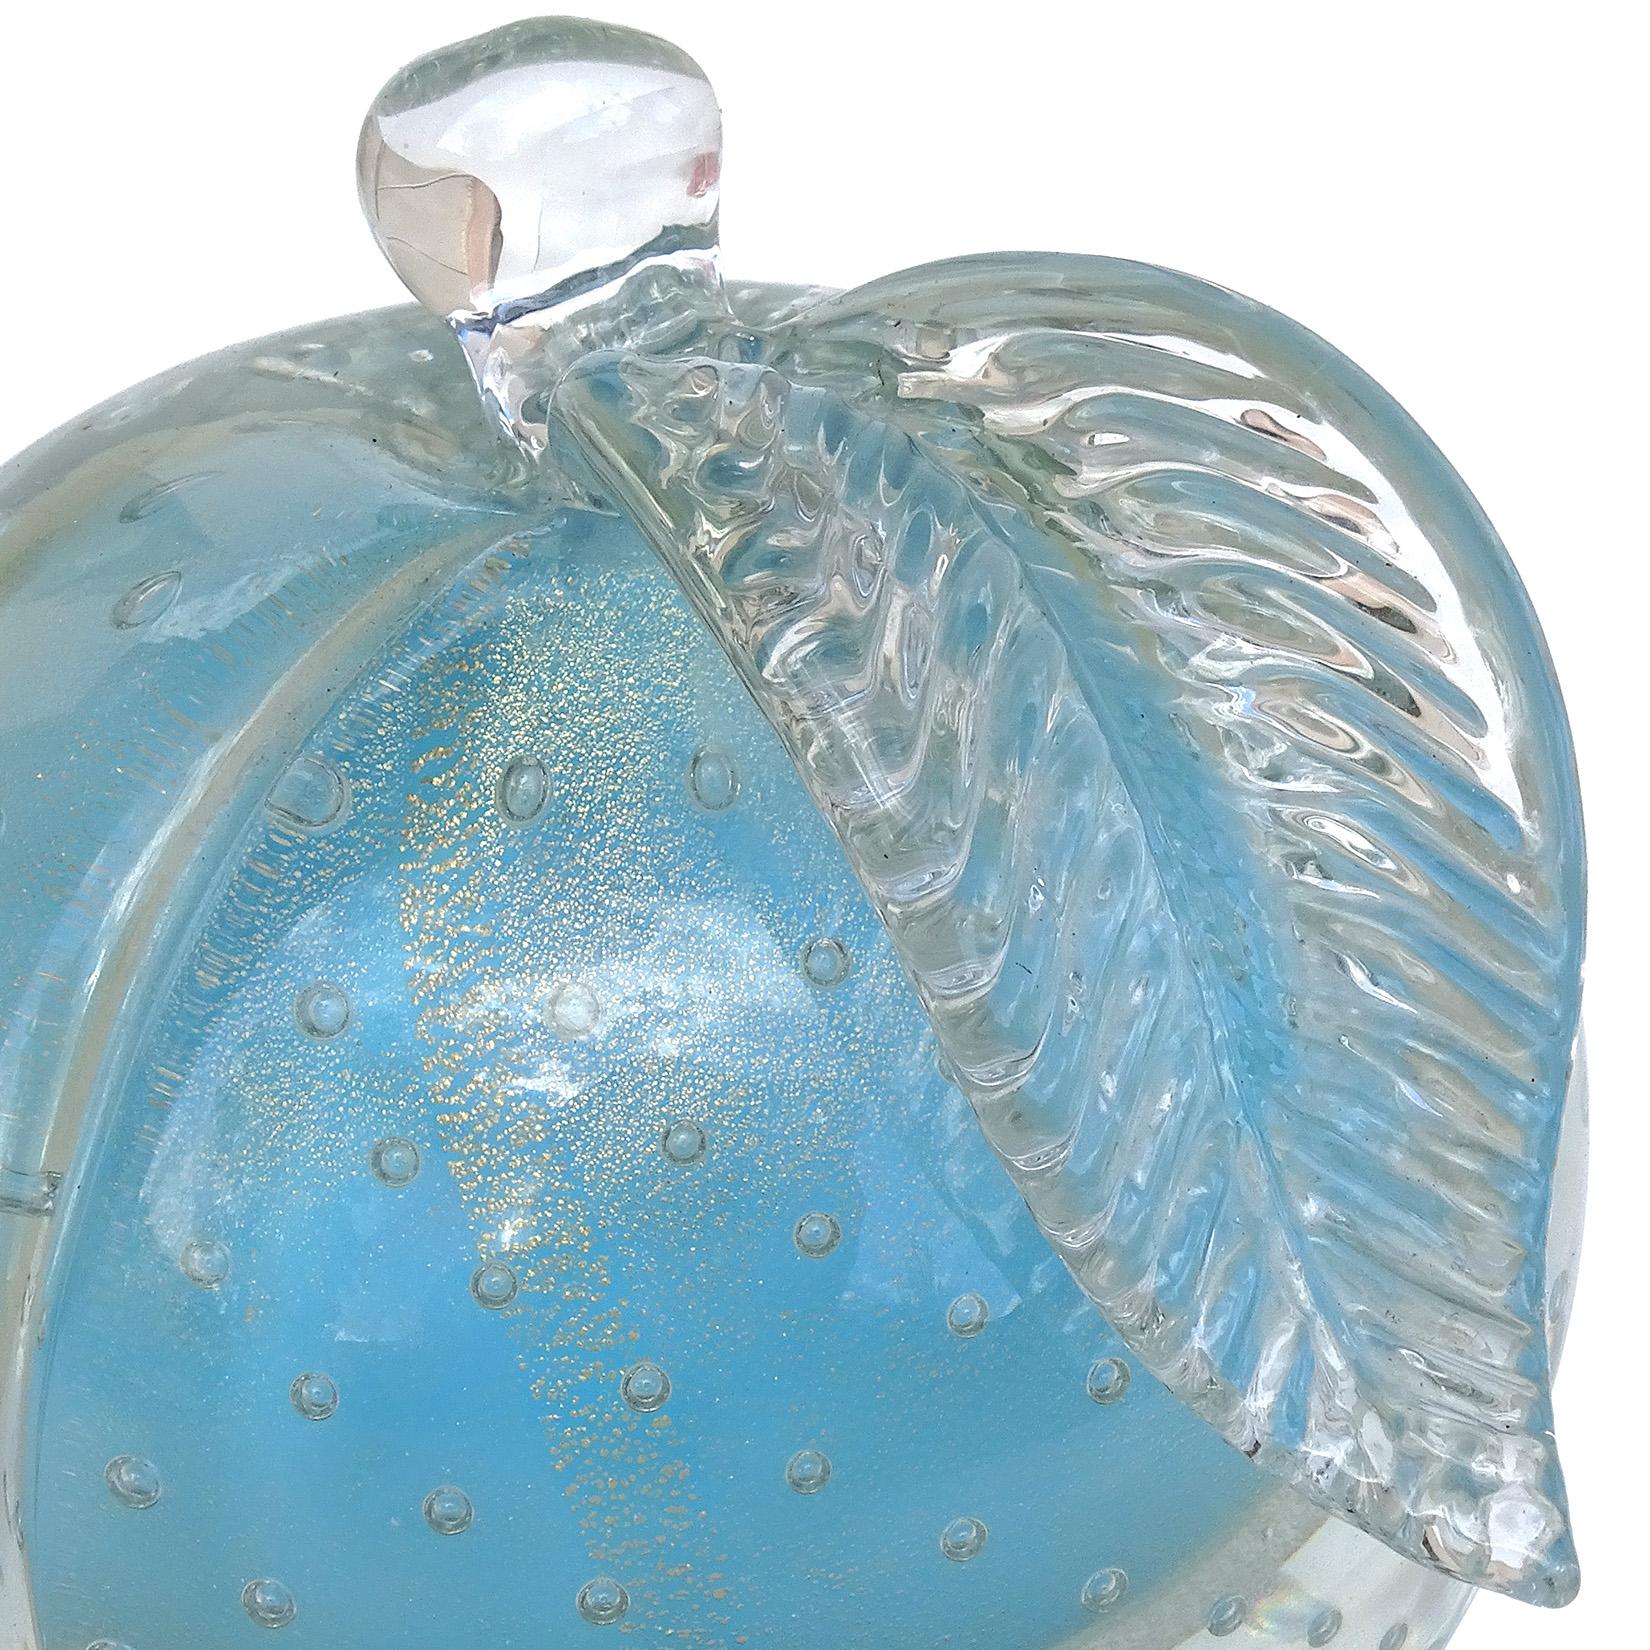 Beautiful vintage Murano hand blown Sommerso sky blue with gold flecks Italian art glass pear and apple fruit bookends. Documented to designer Alfredo Barbini, circa 1950-1960. Published in his catalog. Each piece has 2 polished ends, so they can be